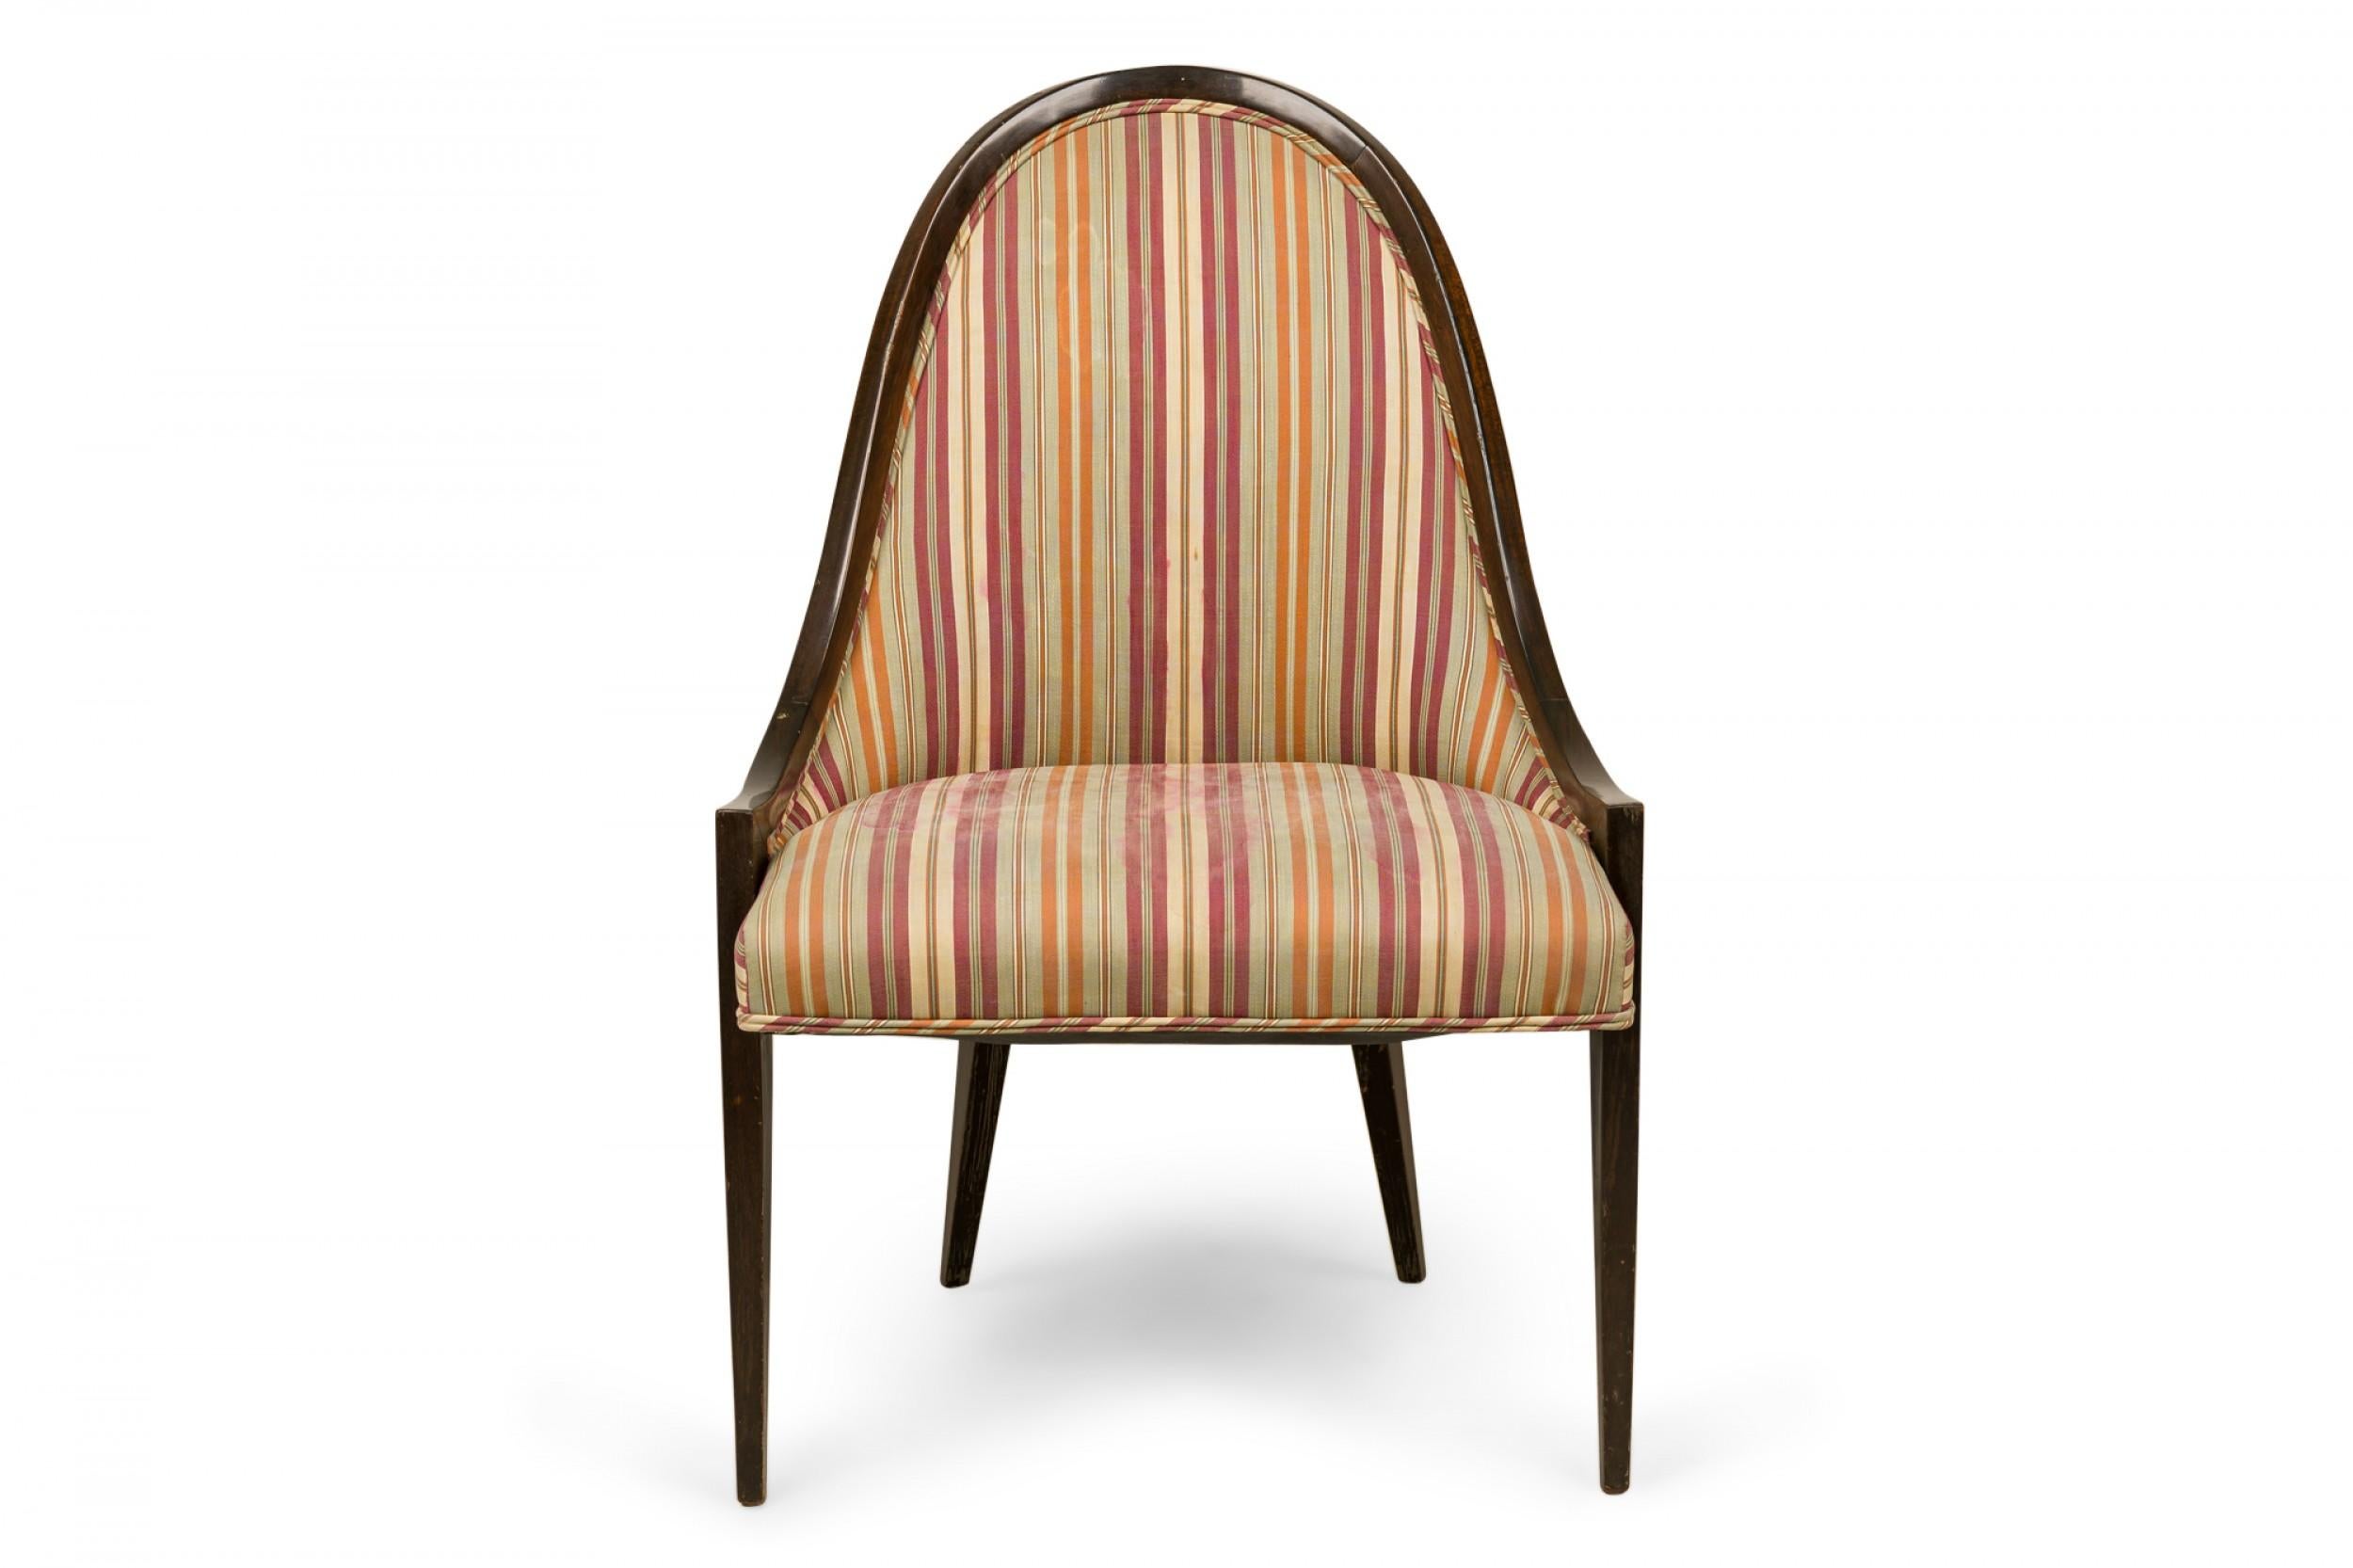 American mid-century 'Gondola' form chair with a curved dark stained wooden frame and muted pink, green, and beige vertically striped upholstered seat and back, resting on four tapered wooden legs. (HARVEY PROBBER)
 